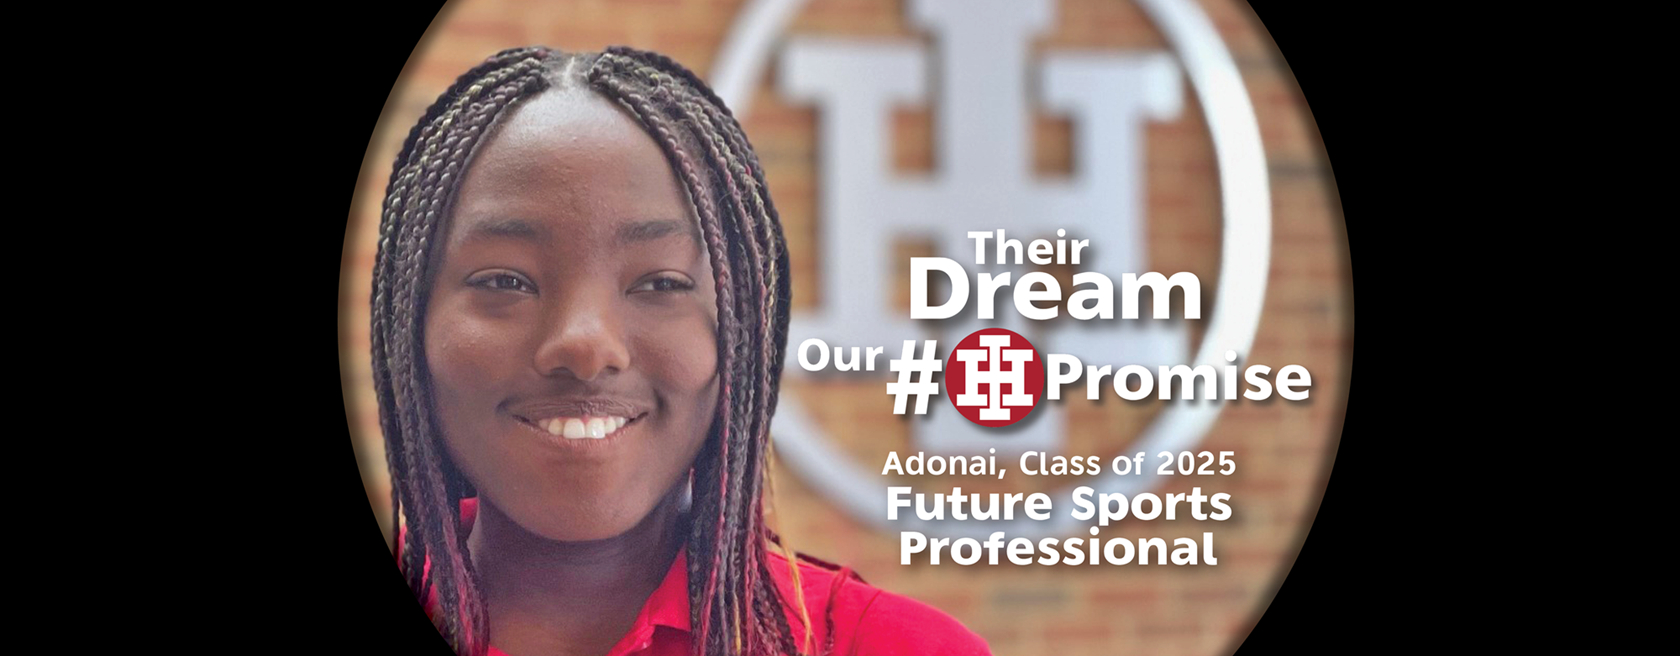 Their Dream Our Promise - Adonai, Class of 2025, Future Sports Professional